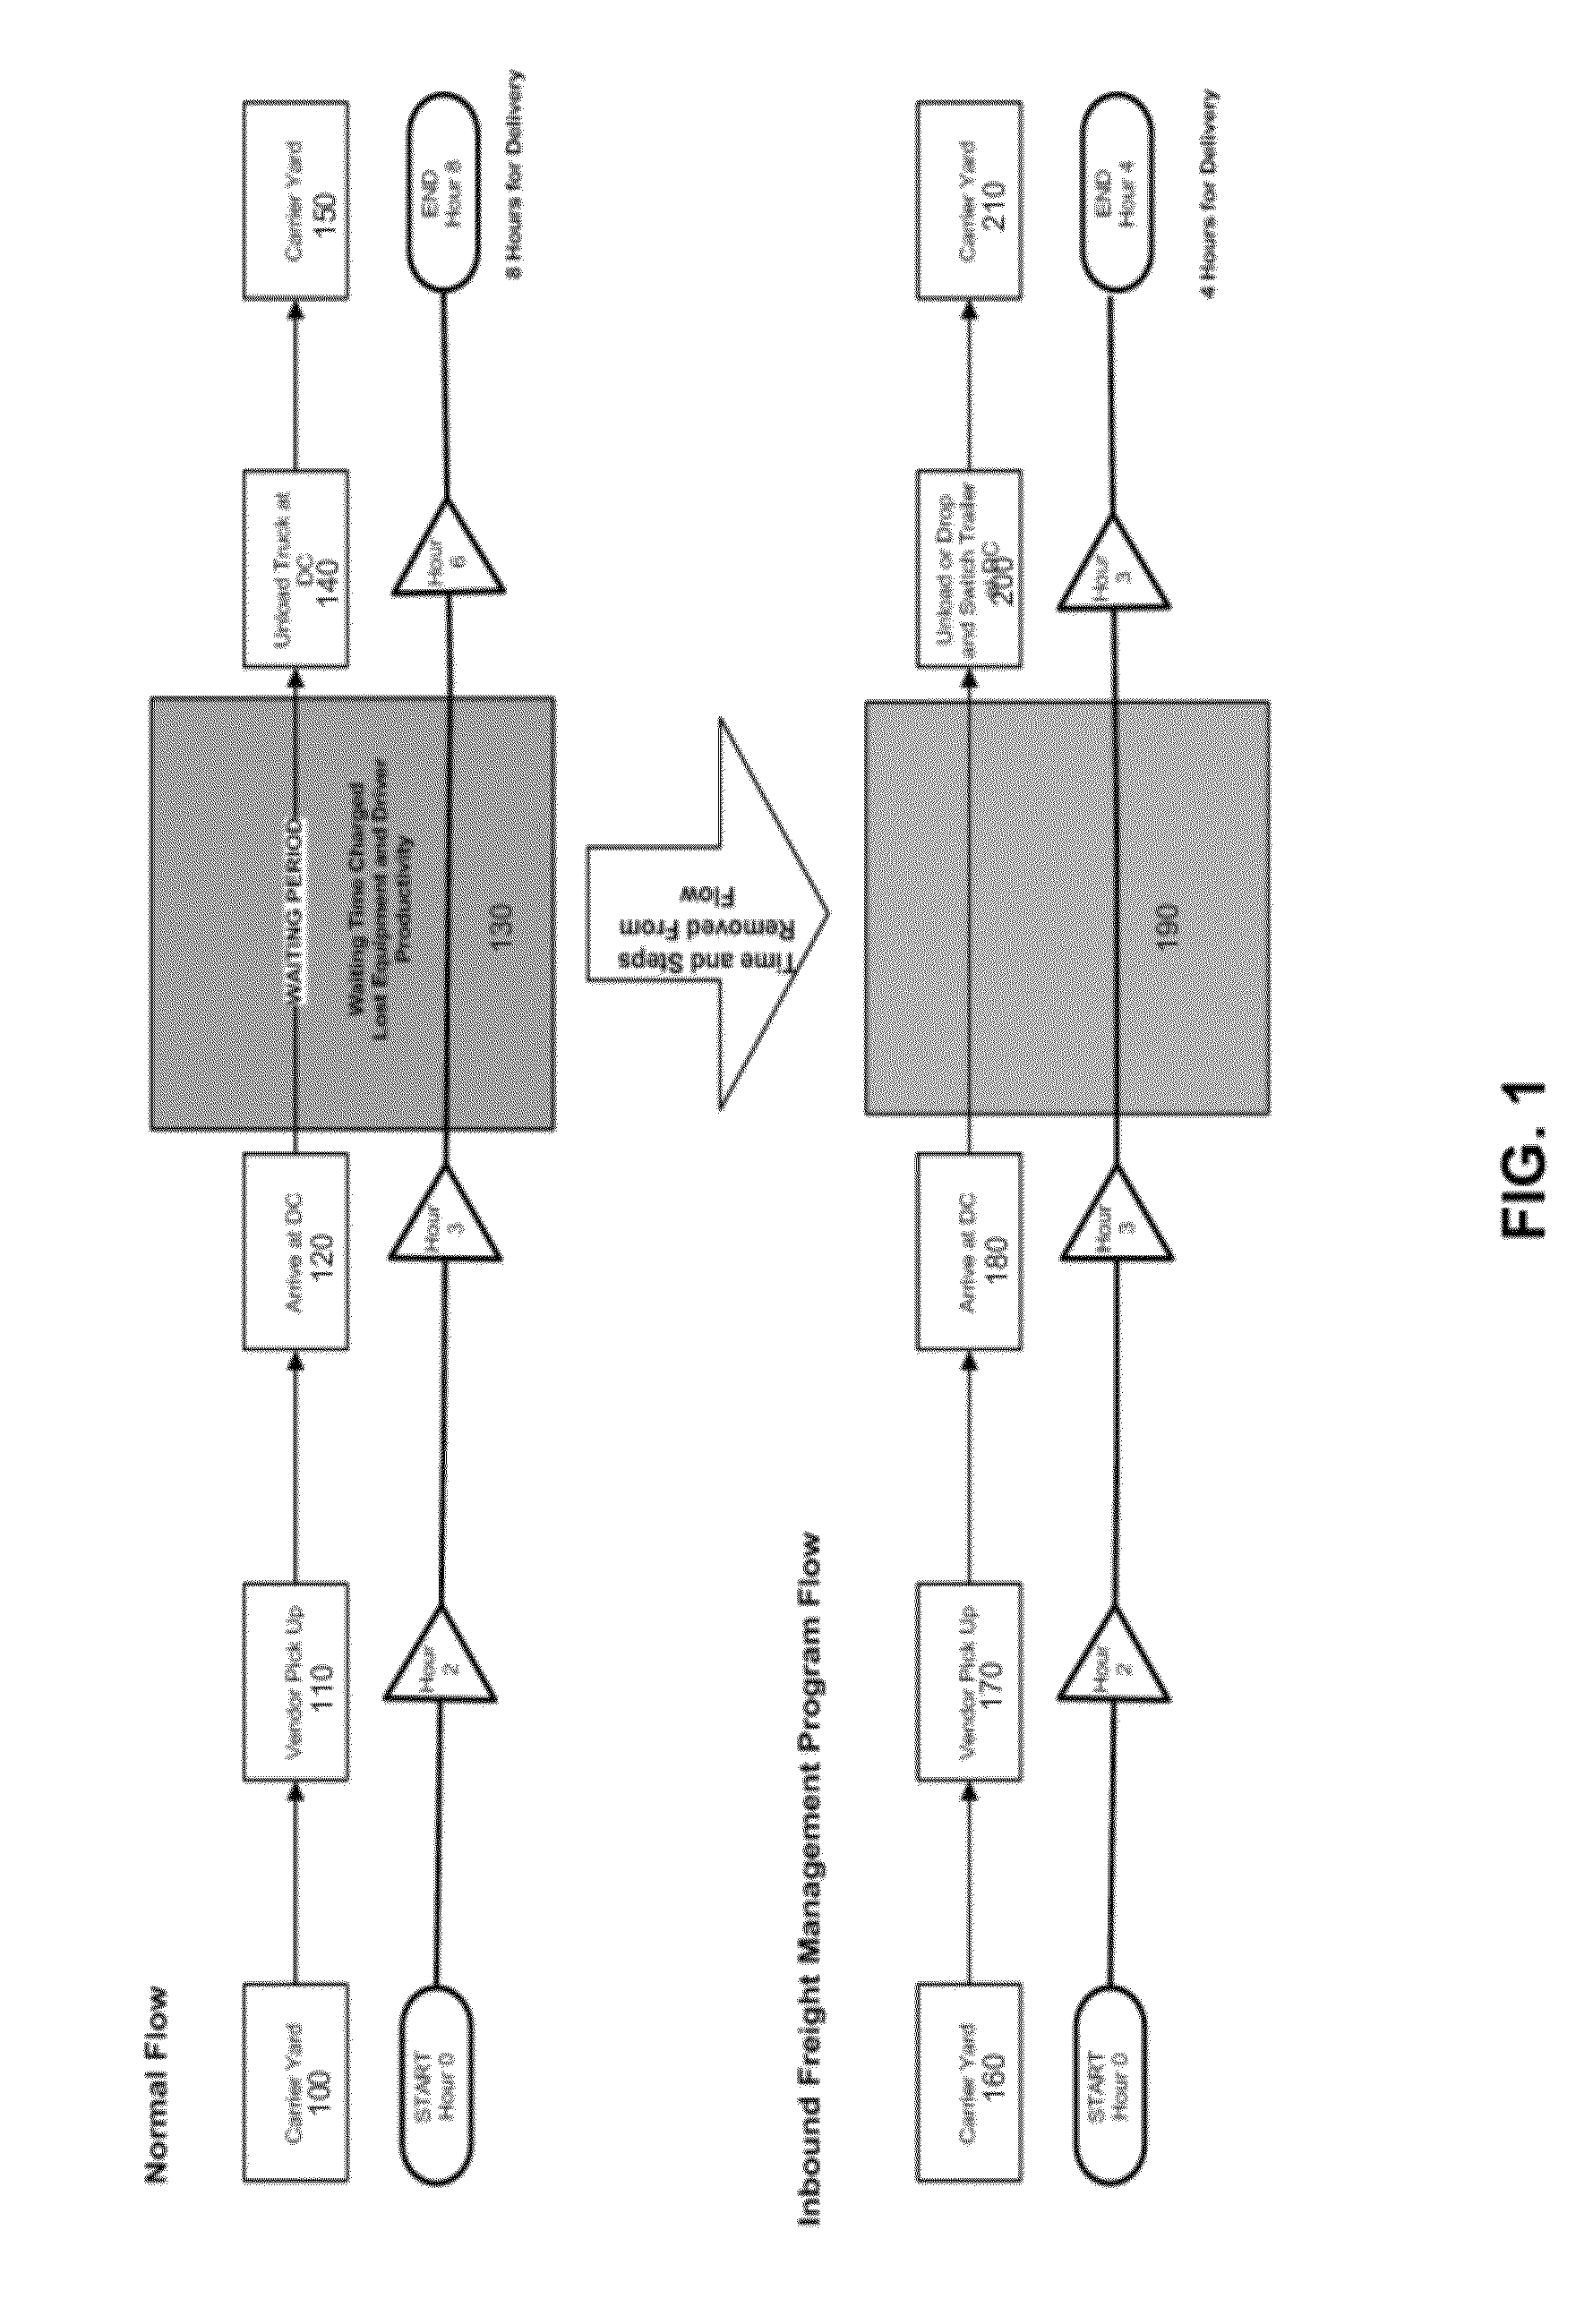 Method for managing the inbound freight process of the supply chain on behalf of a retailer distribution network